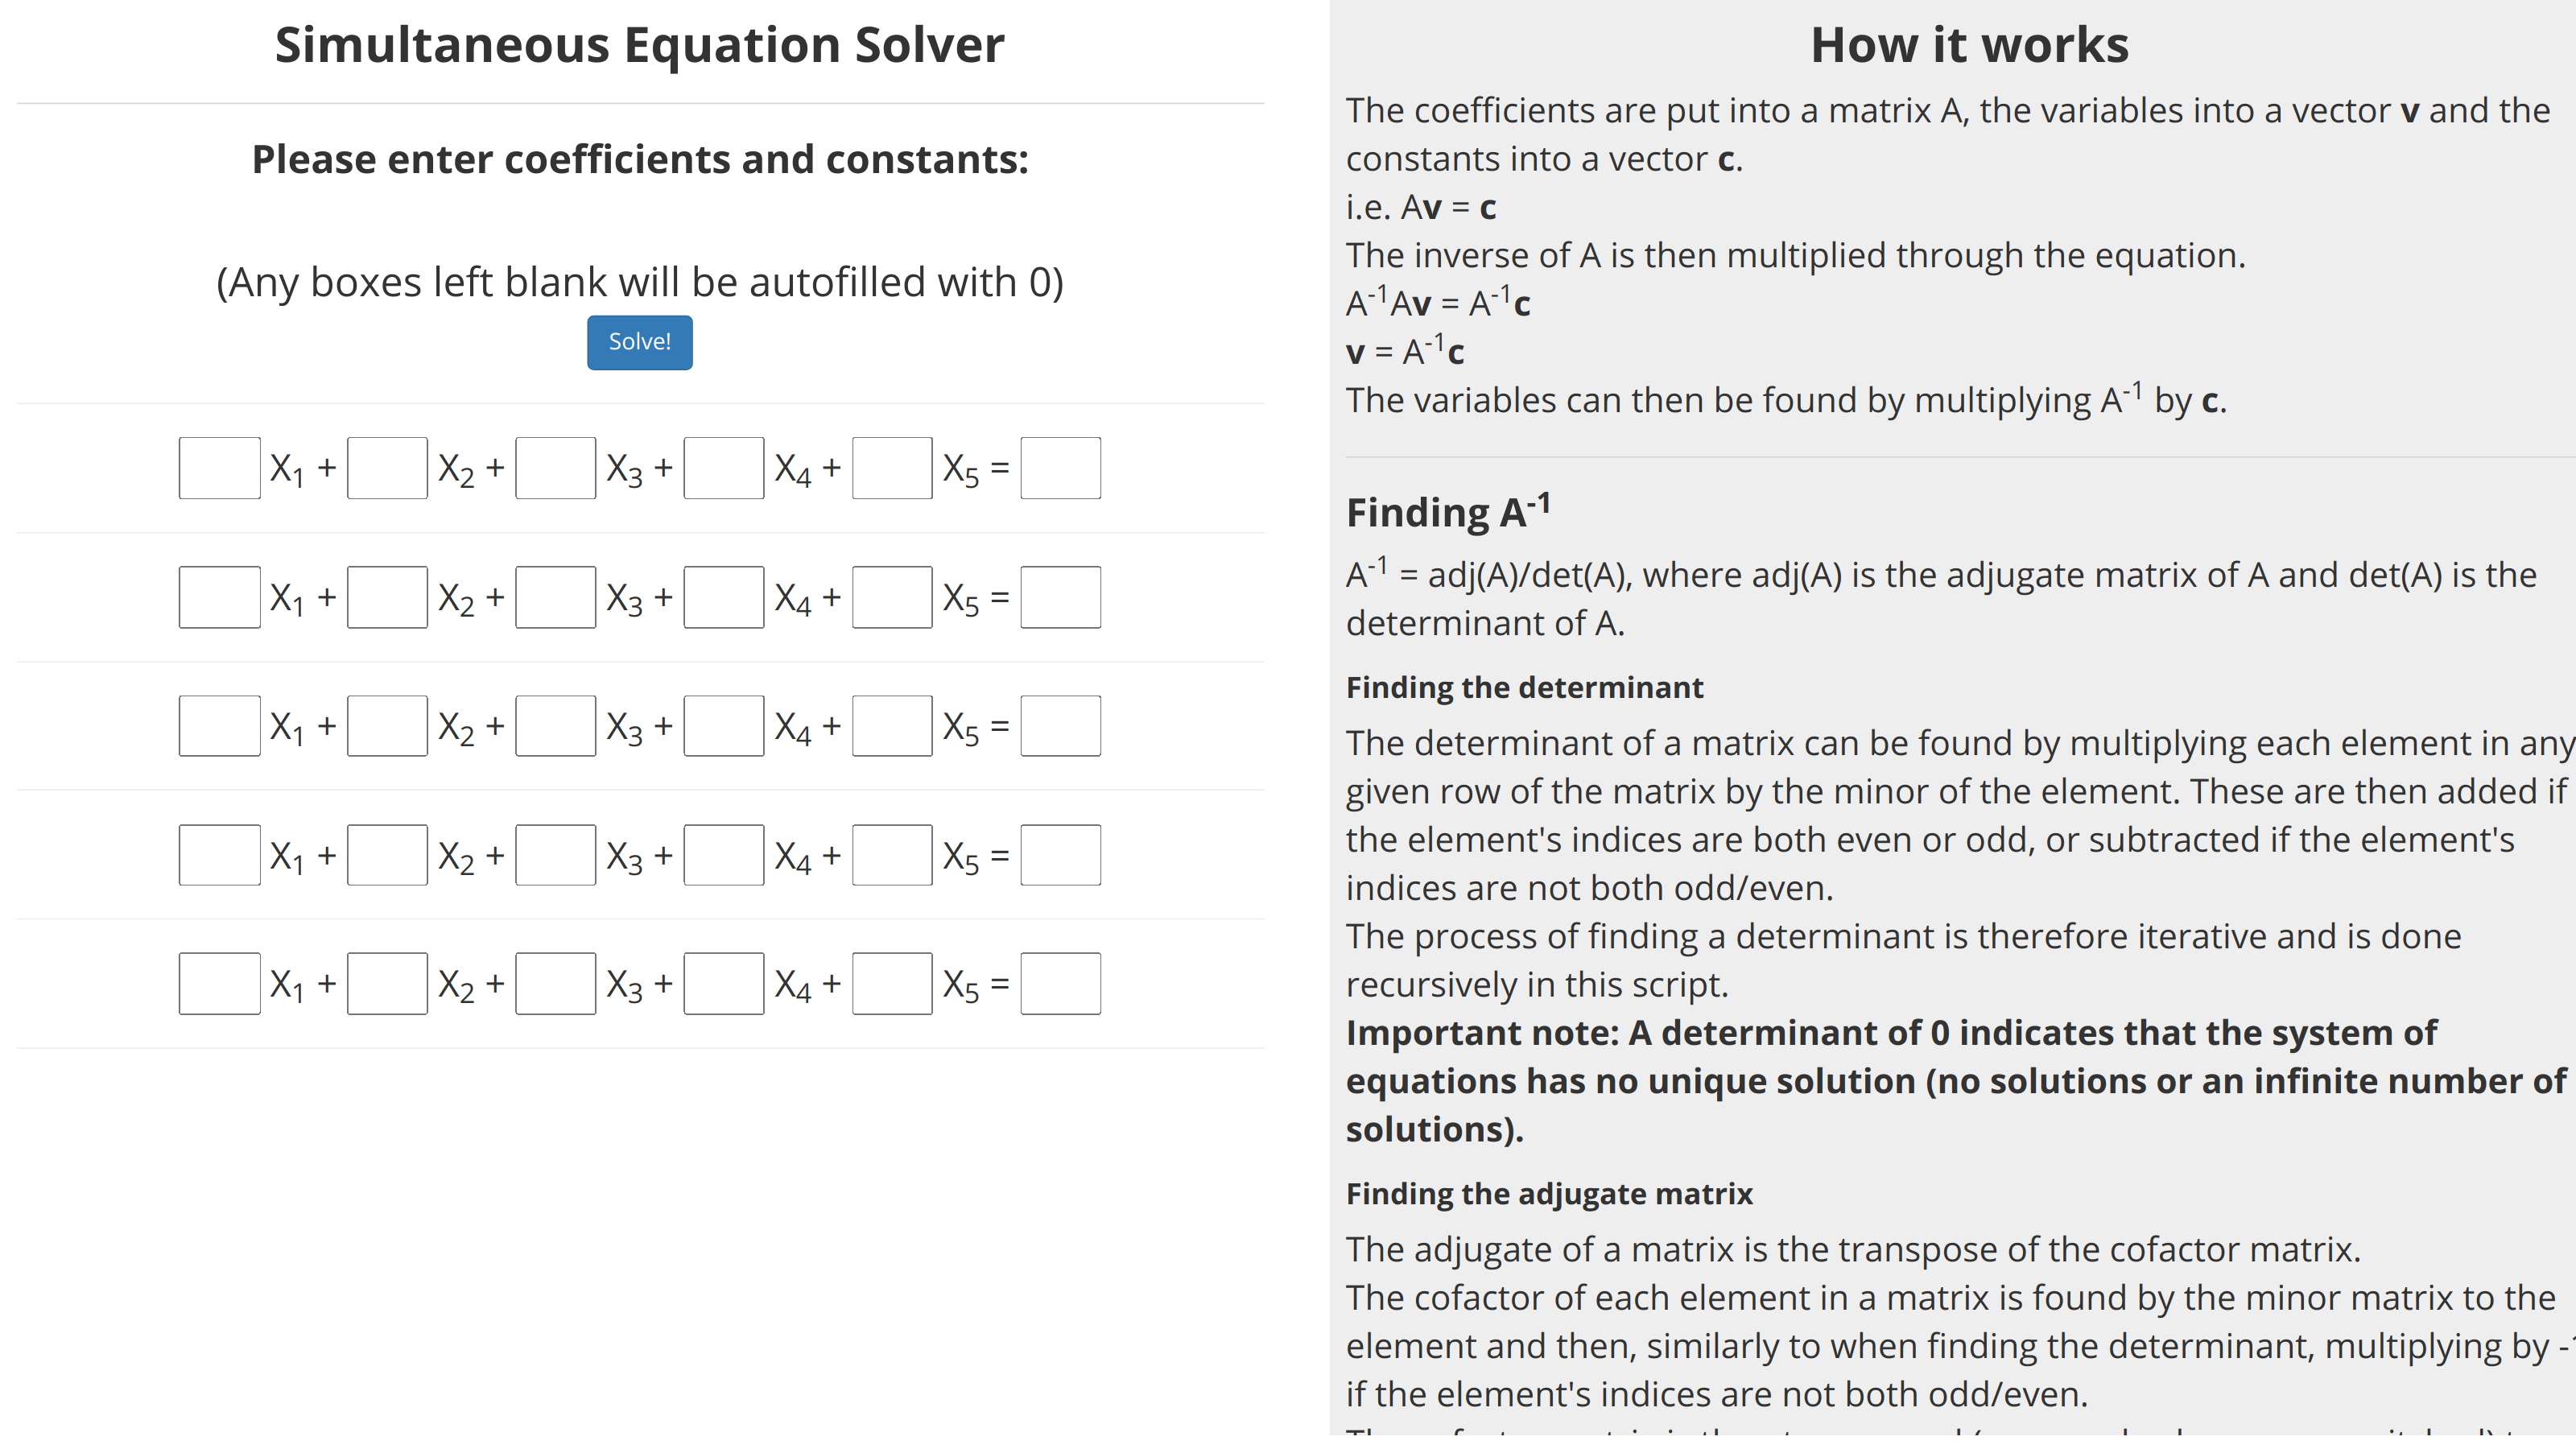 Image of Equation Solver